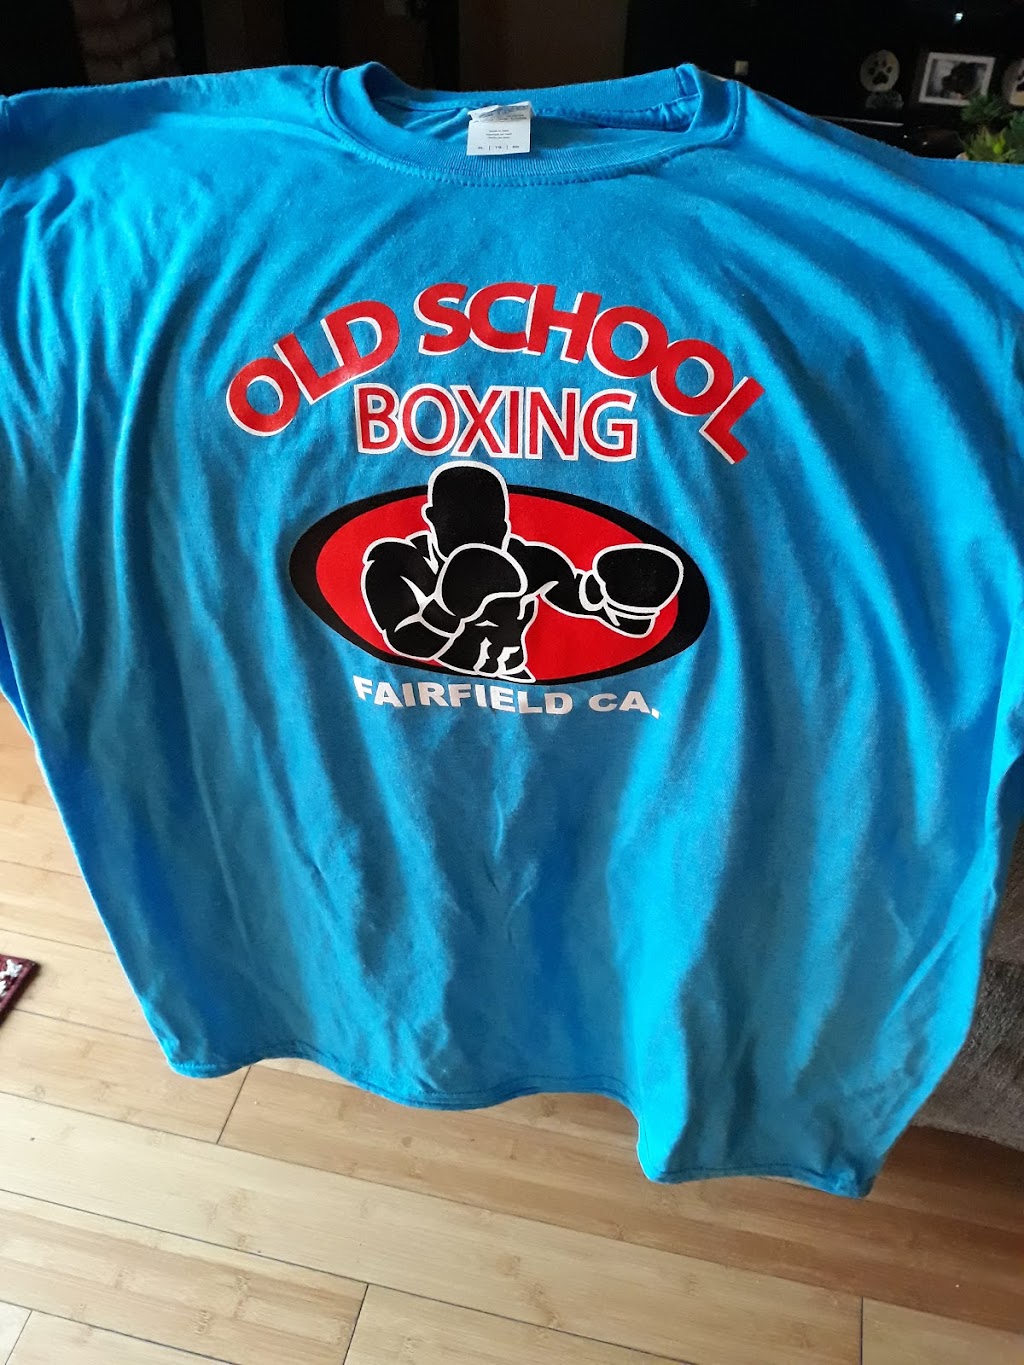 Old School Boxing | 660 Parker Rd, Travis AFB, CA 94535 | Phone: (707) 514-6559